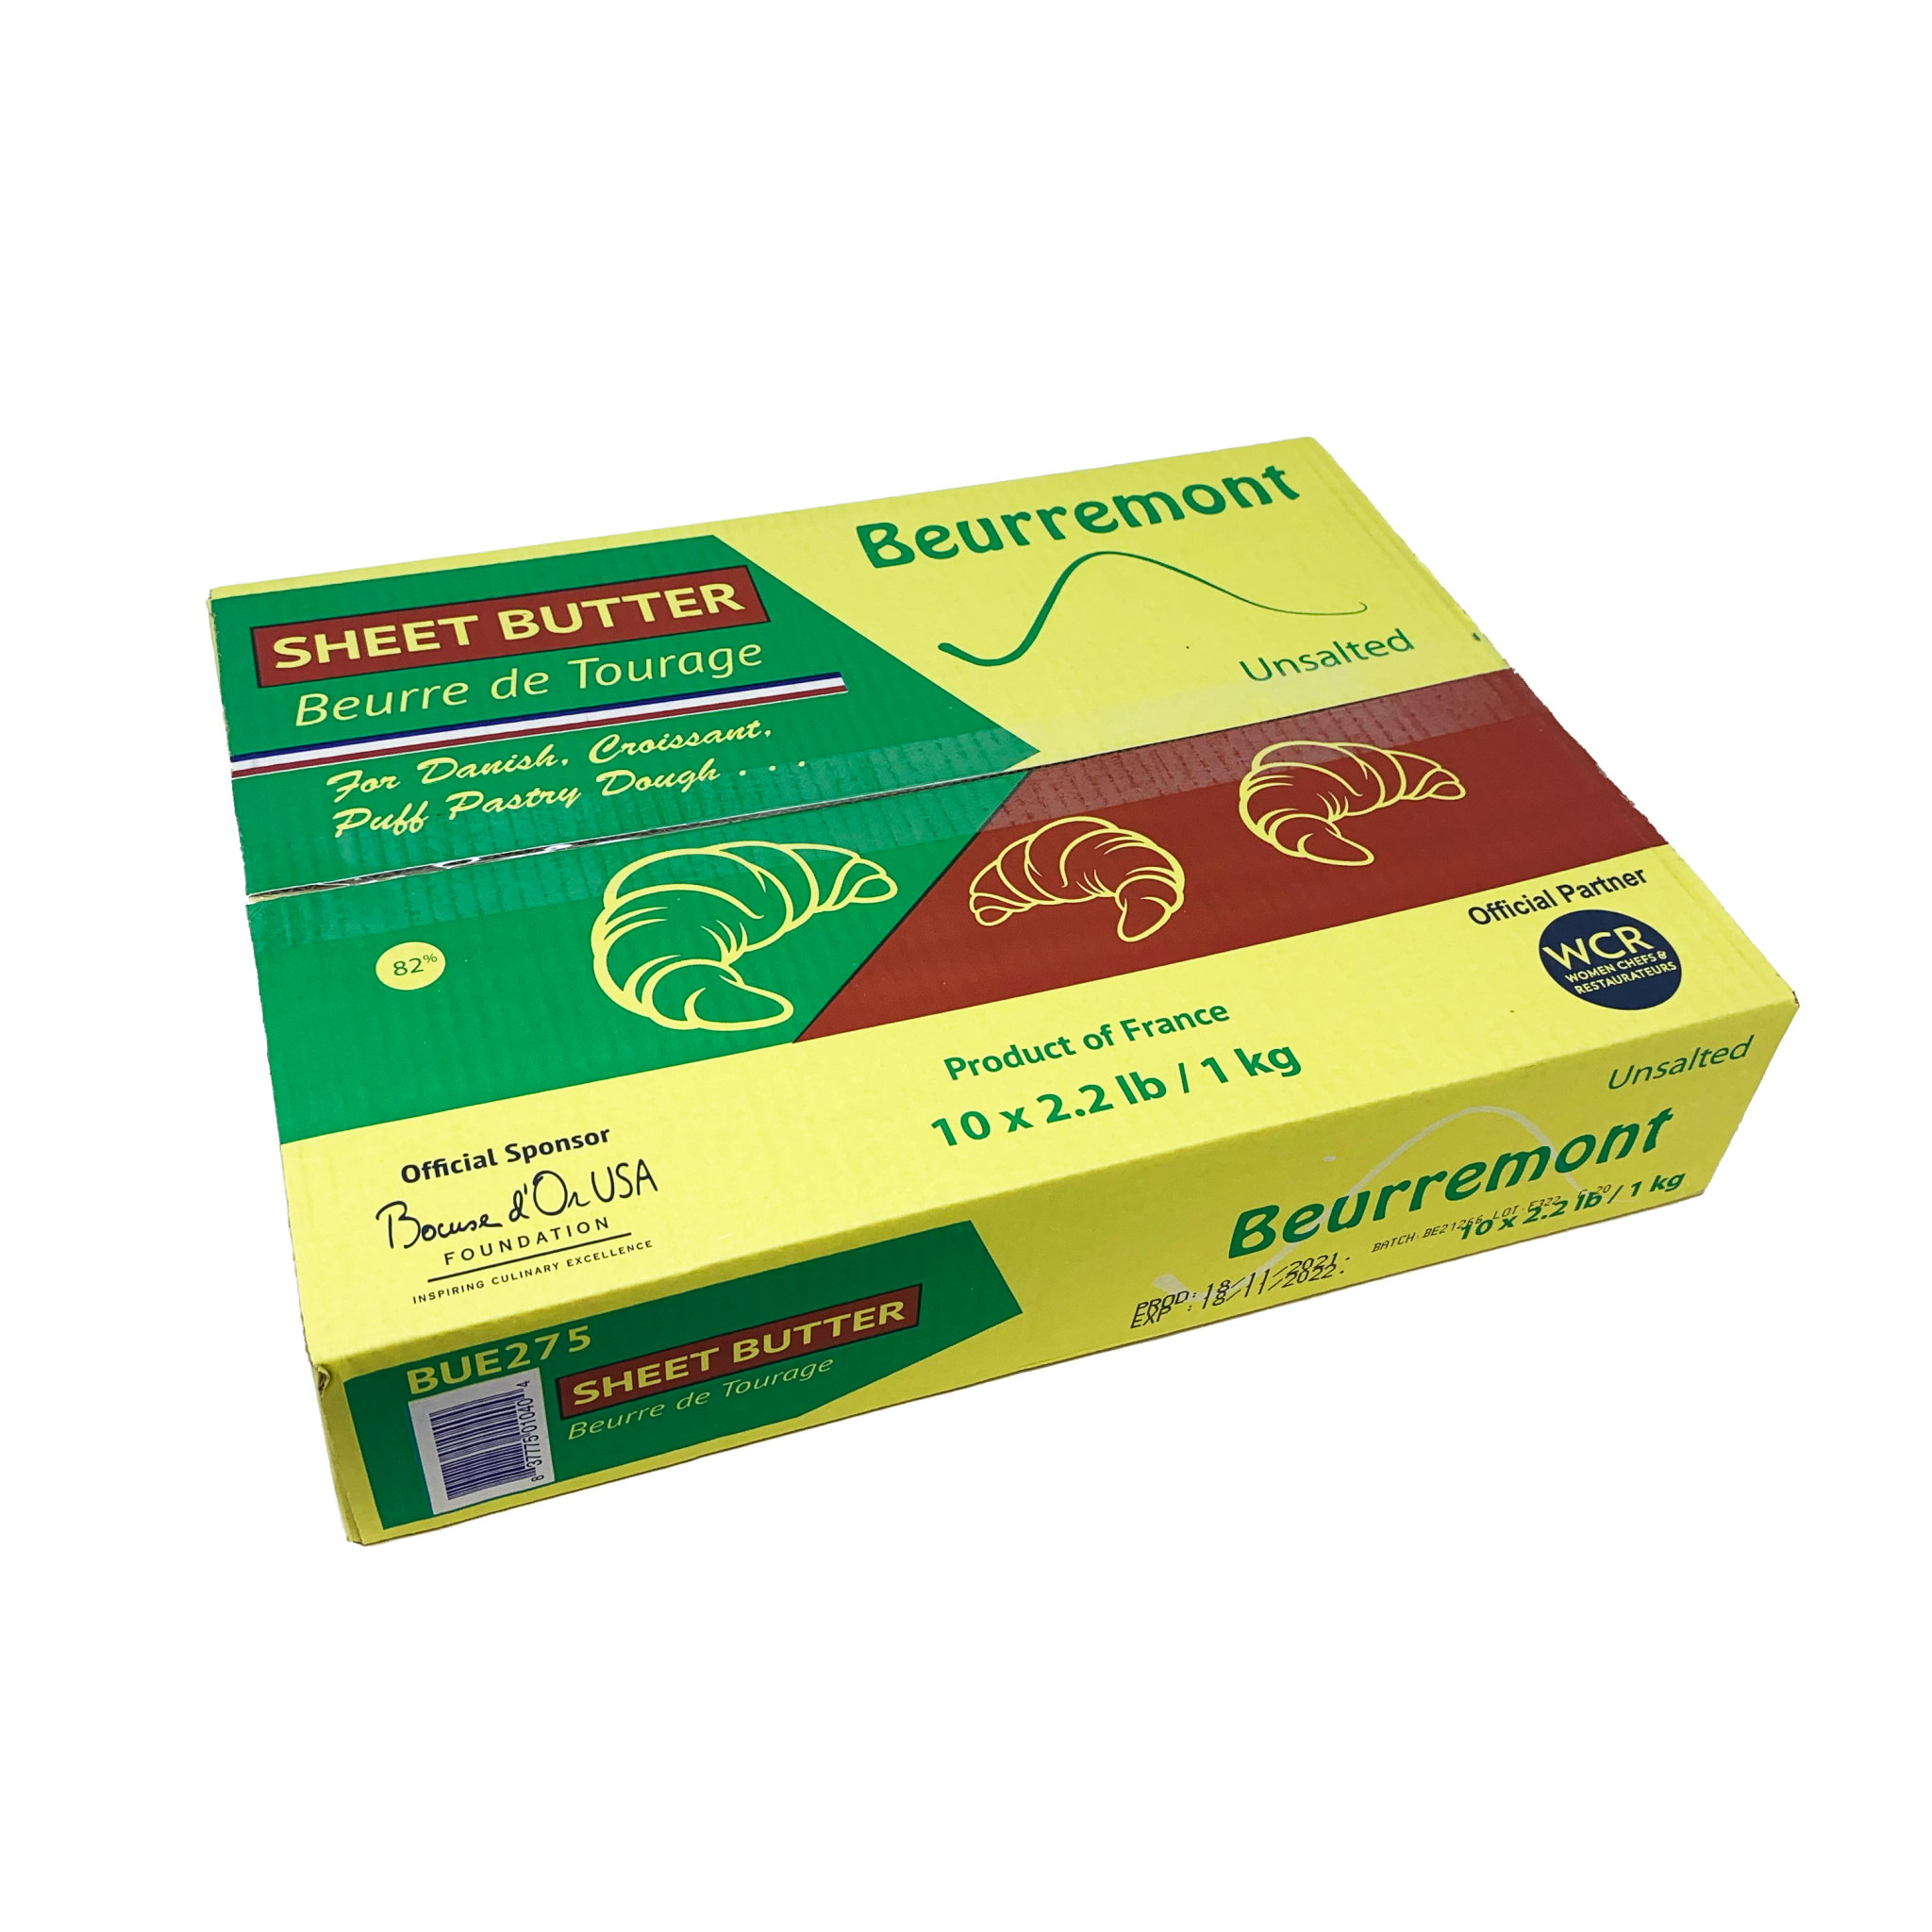 Beurremont 82% Tourage Butter in Sheets 2.2 lb (box of 10